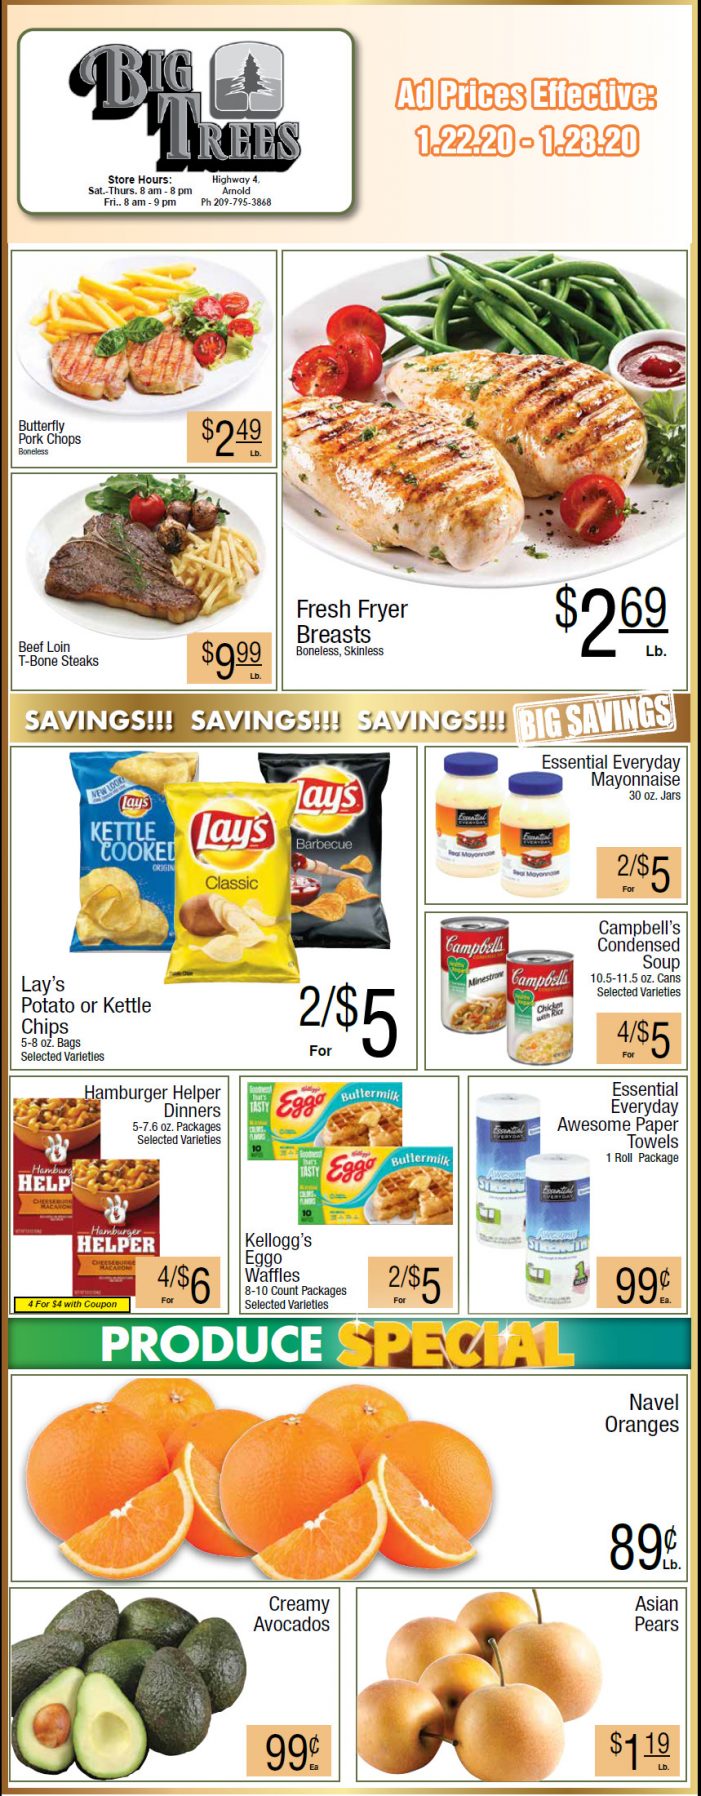 Big Trees Market Weekly Ad & Grocery Specials Through January 28th!